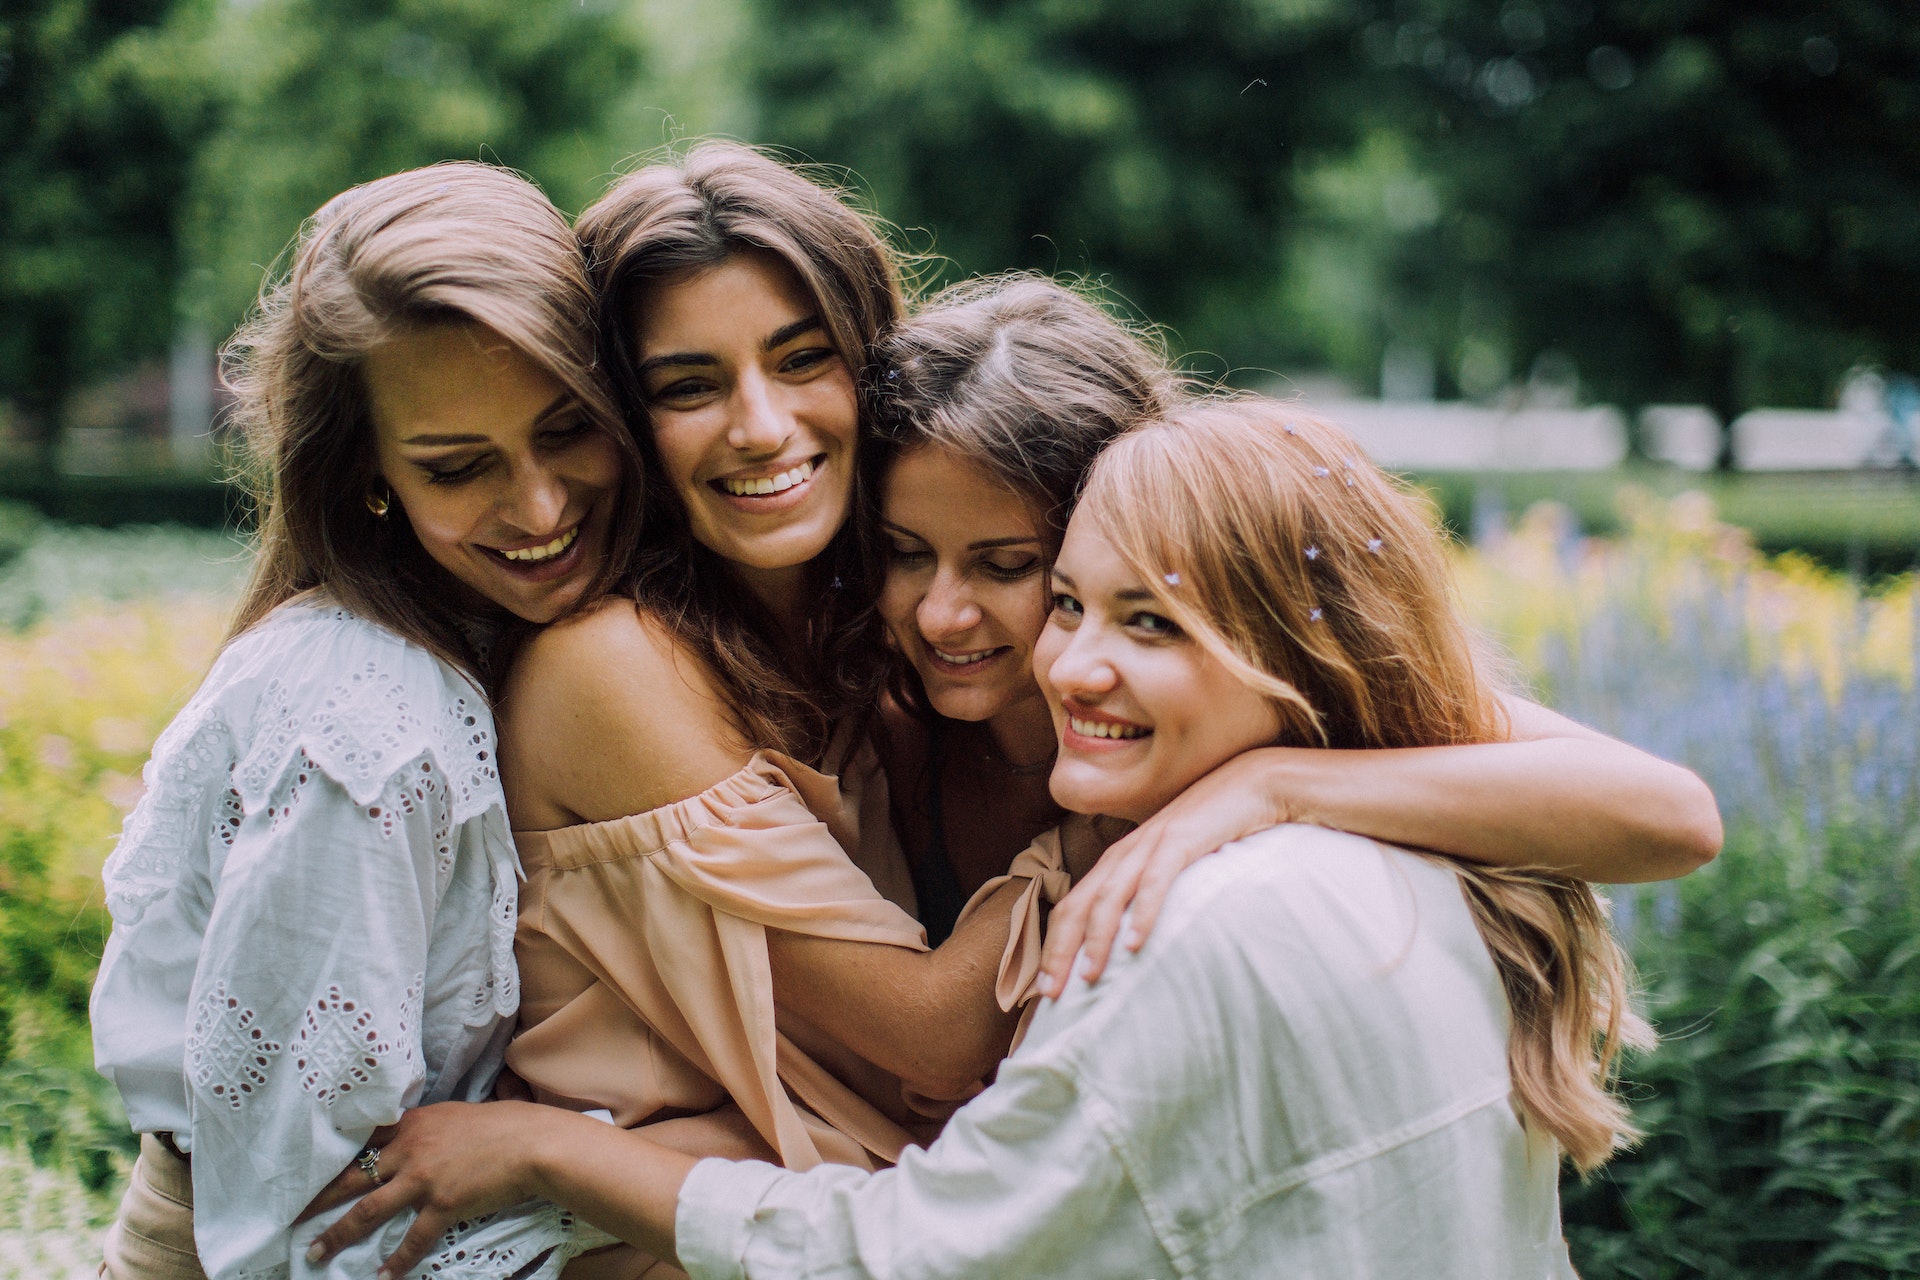 Four women hugging each other and showing confidence in themselves